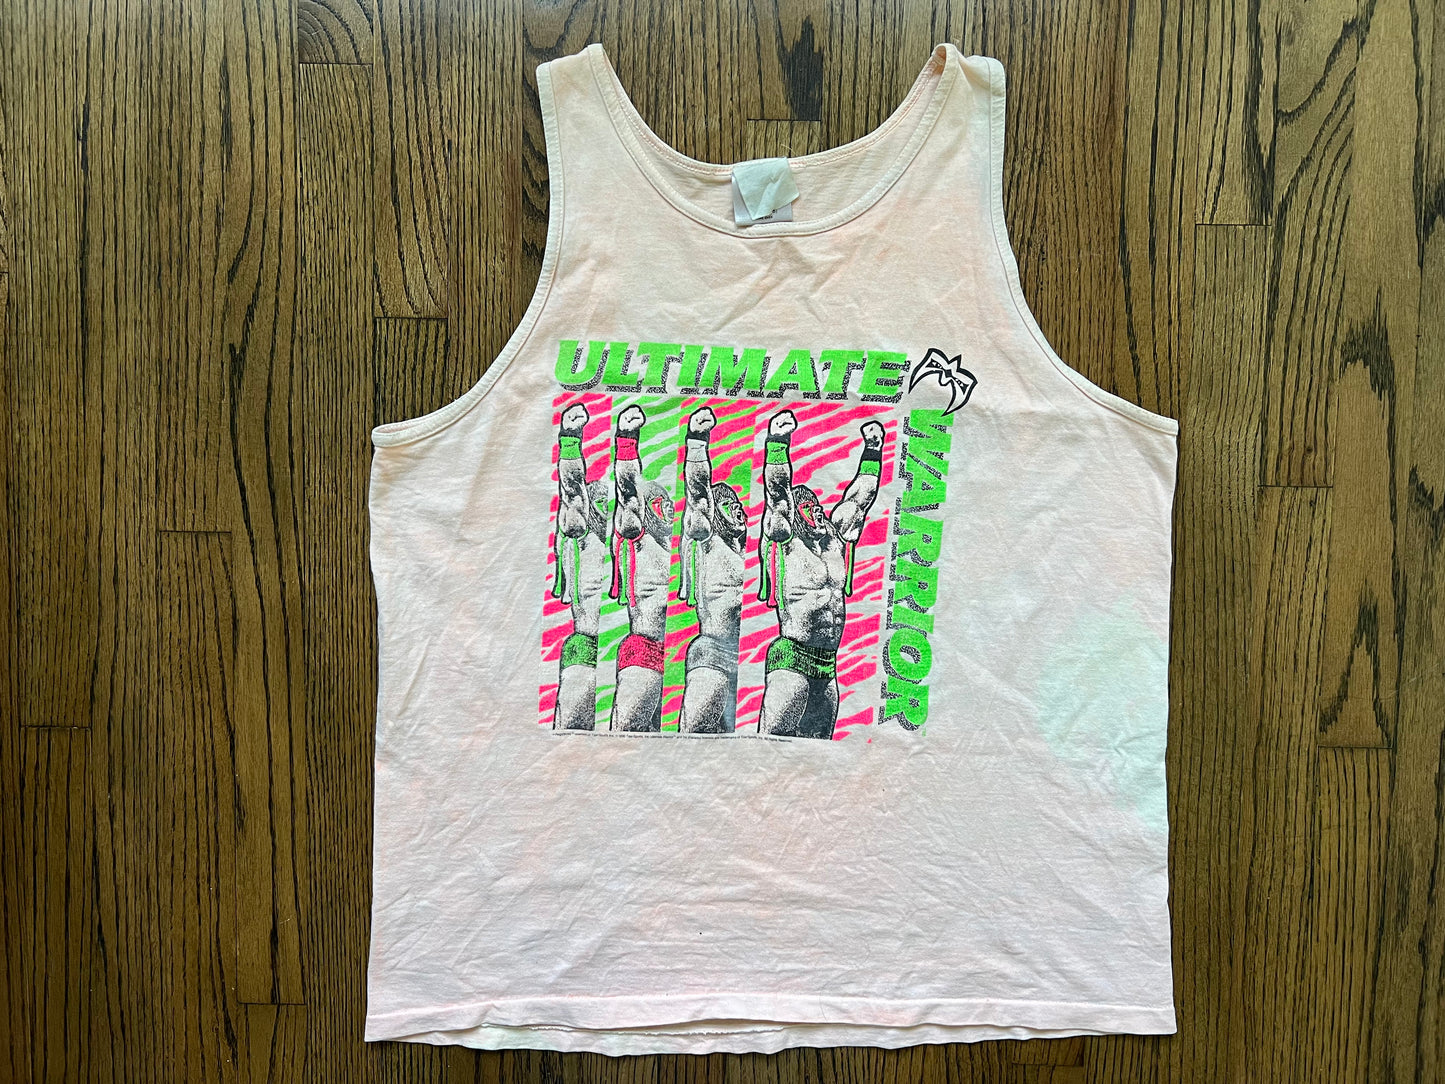 1990 WWF Ultimate Warrior Tank Top
 
The